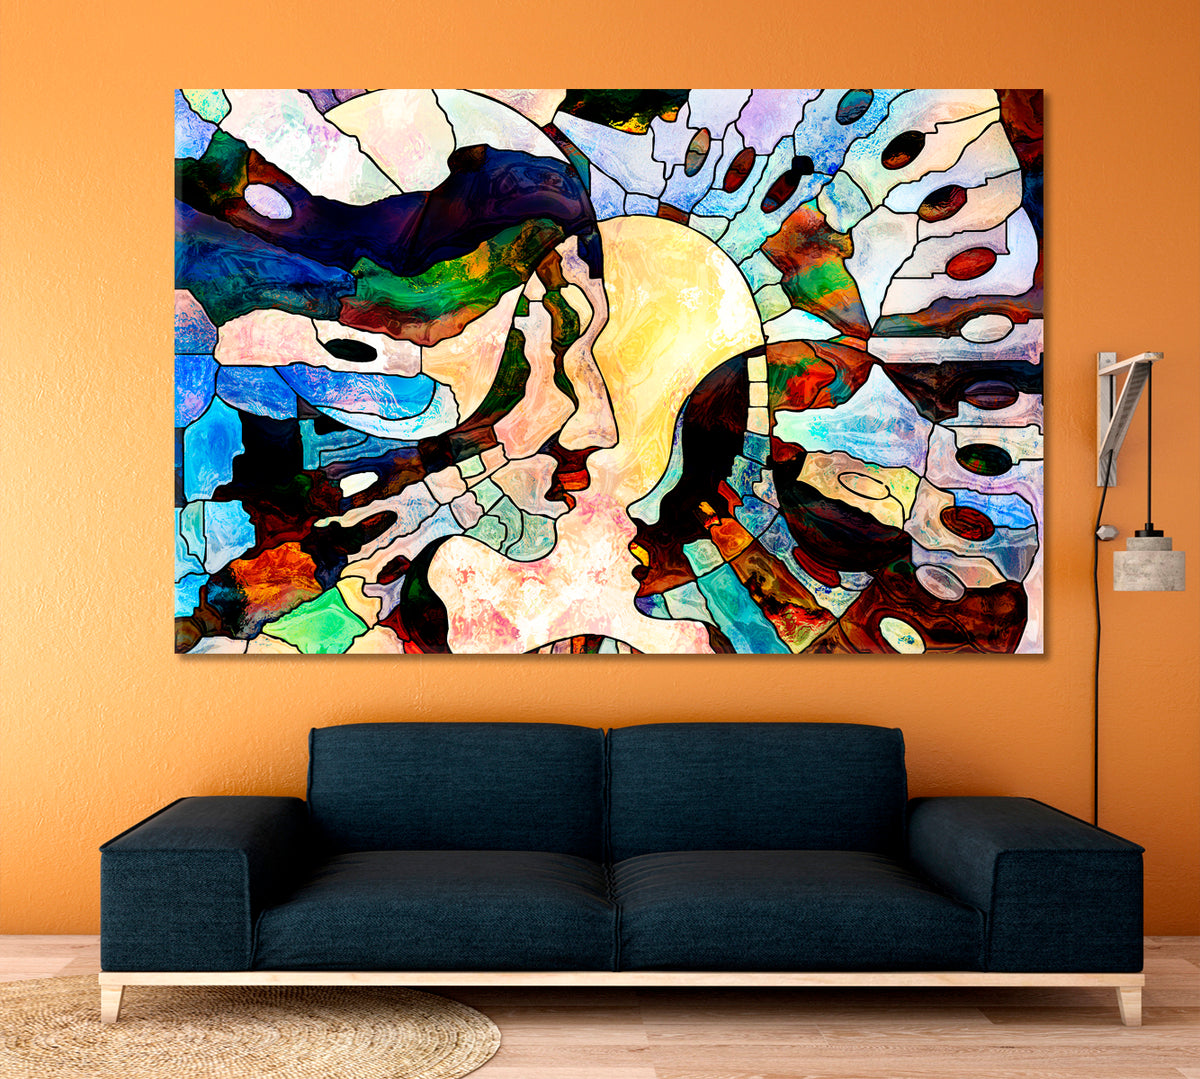 Colors Of Love Contemporary Art Artesty 1 panel 24" x 16" 